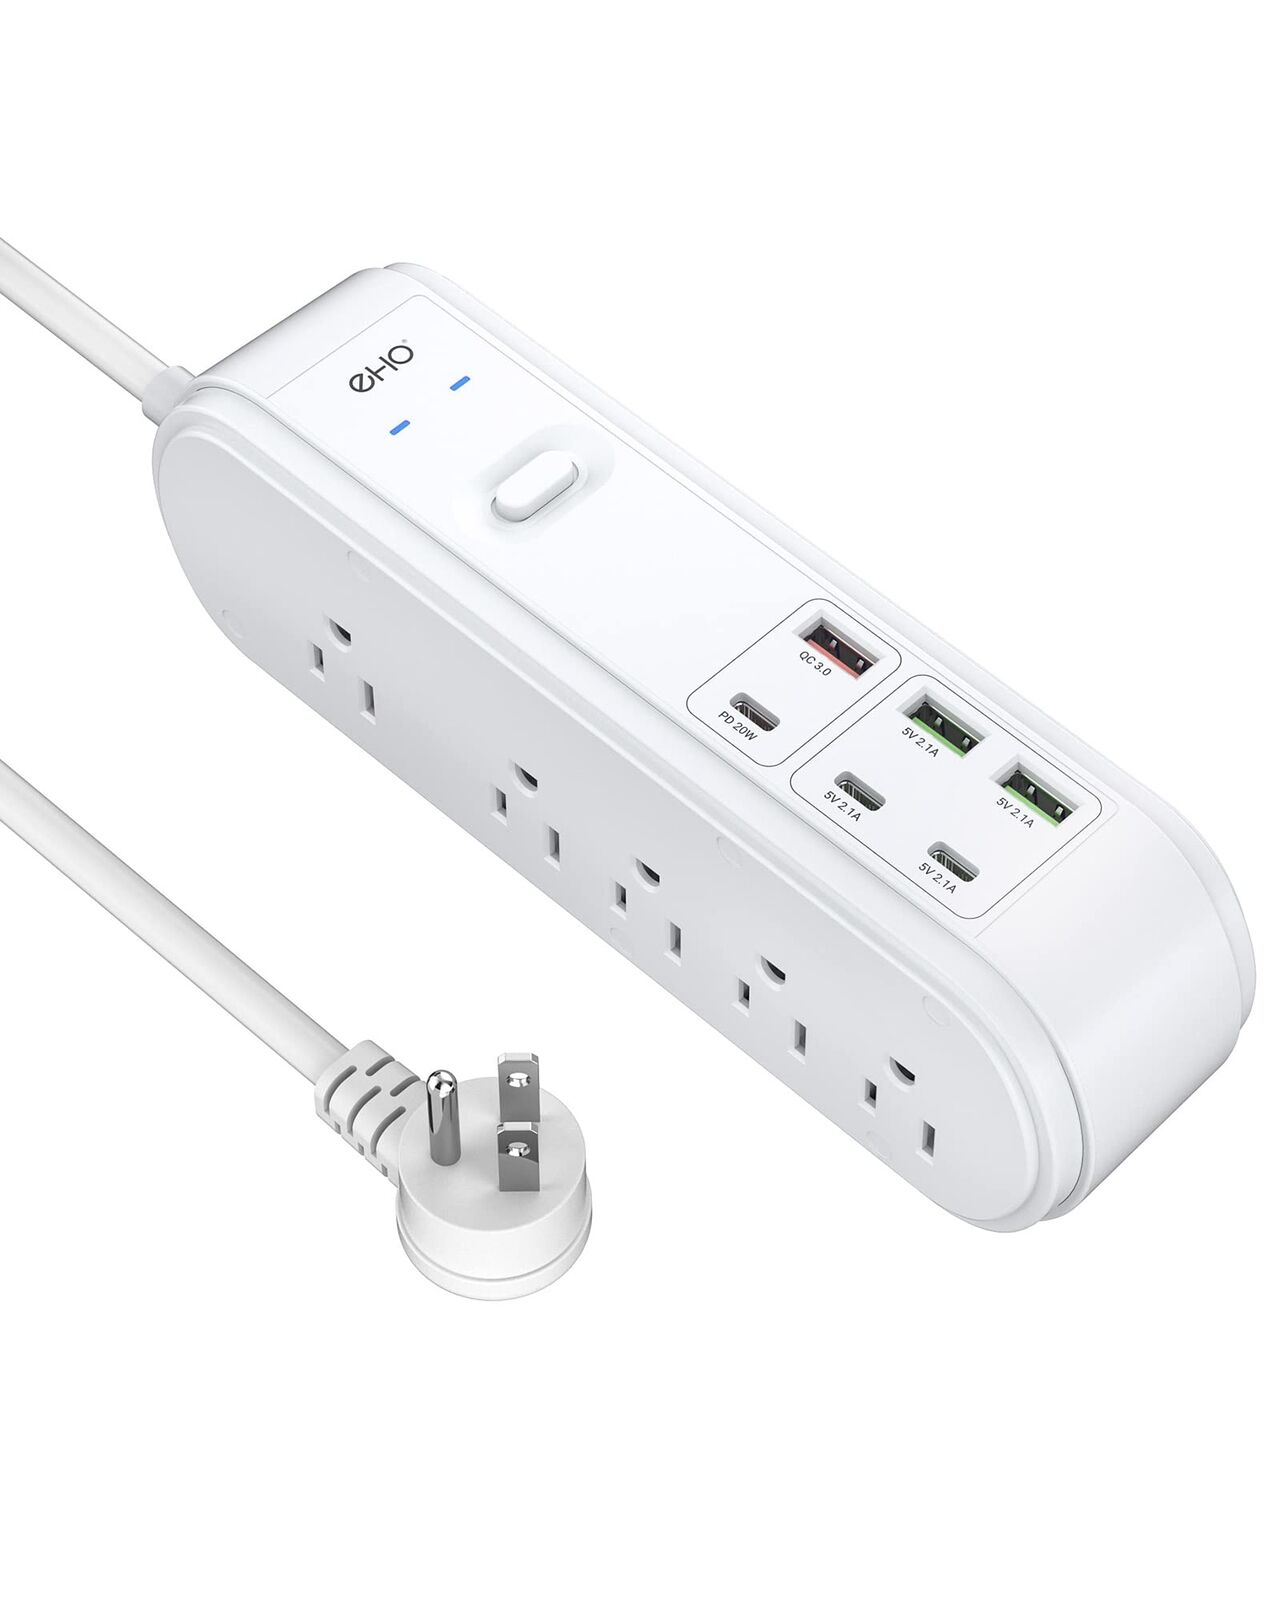 PD 20W Surge Protector, 10 Outlets and 3 USB C&3 USB A Ports, 6ft Extension C...